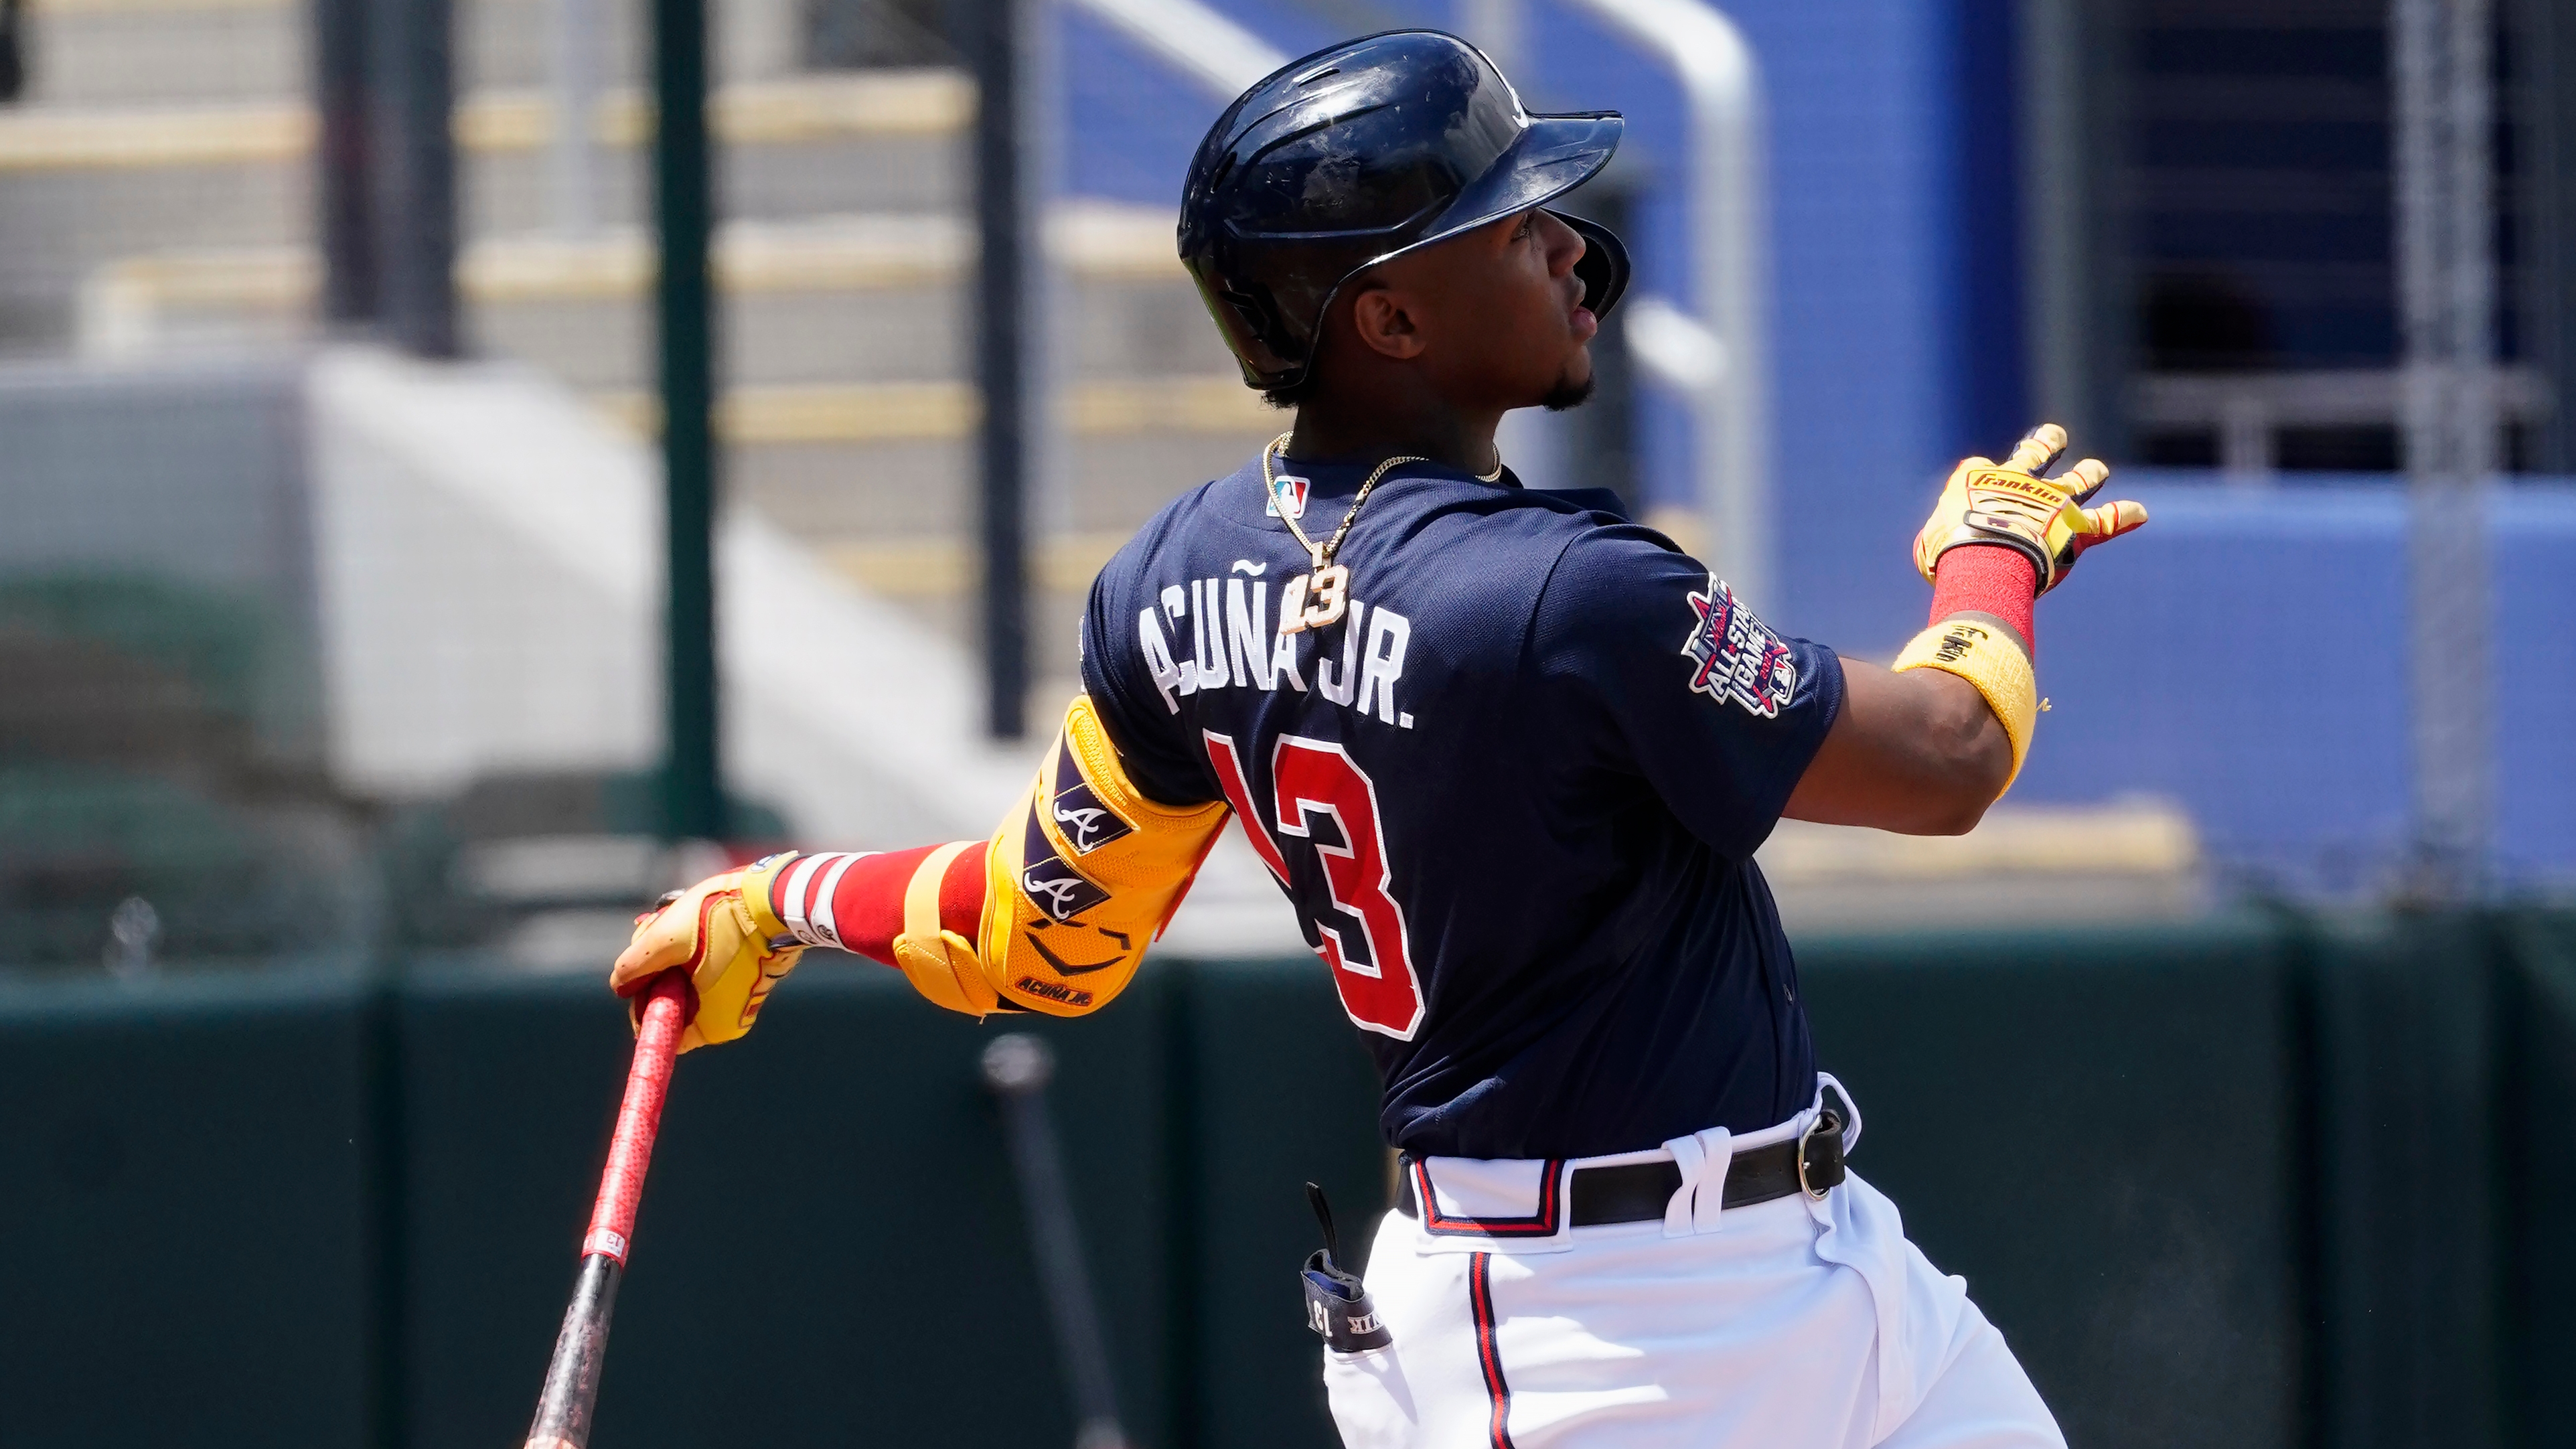 Braves 2021 Opening Day roster announced 